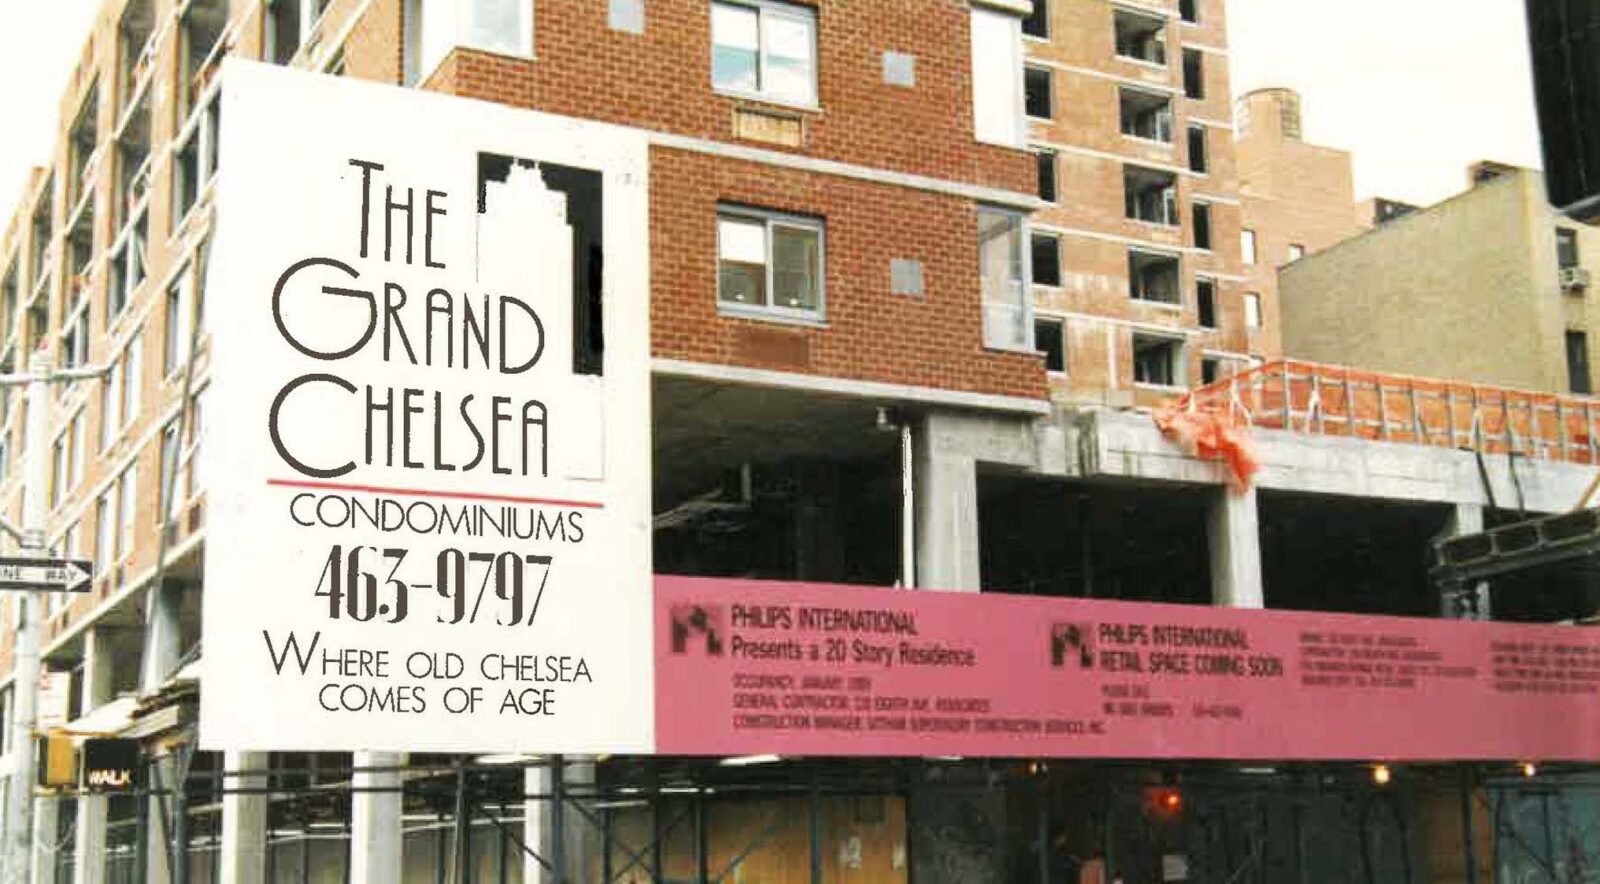 The Grand Chelsea